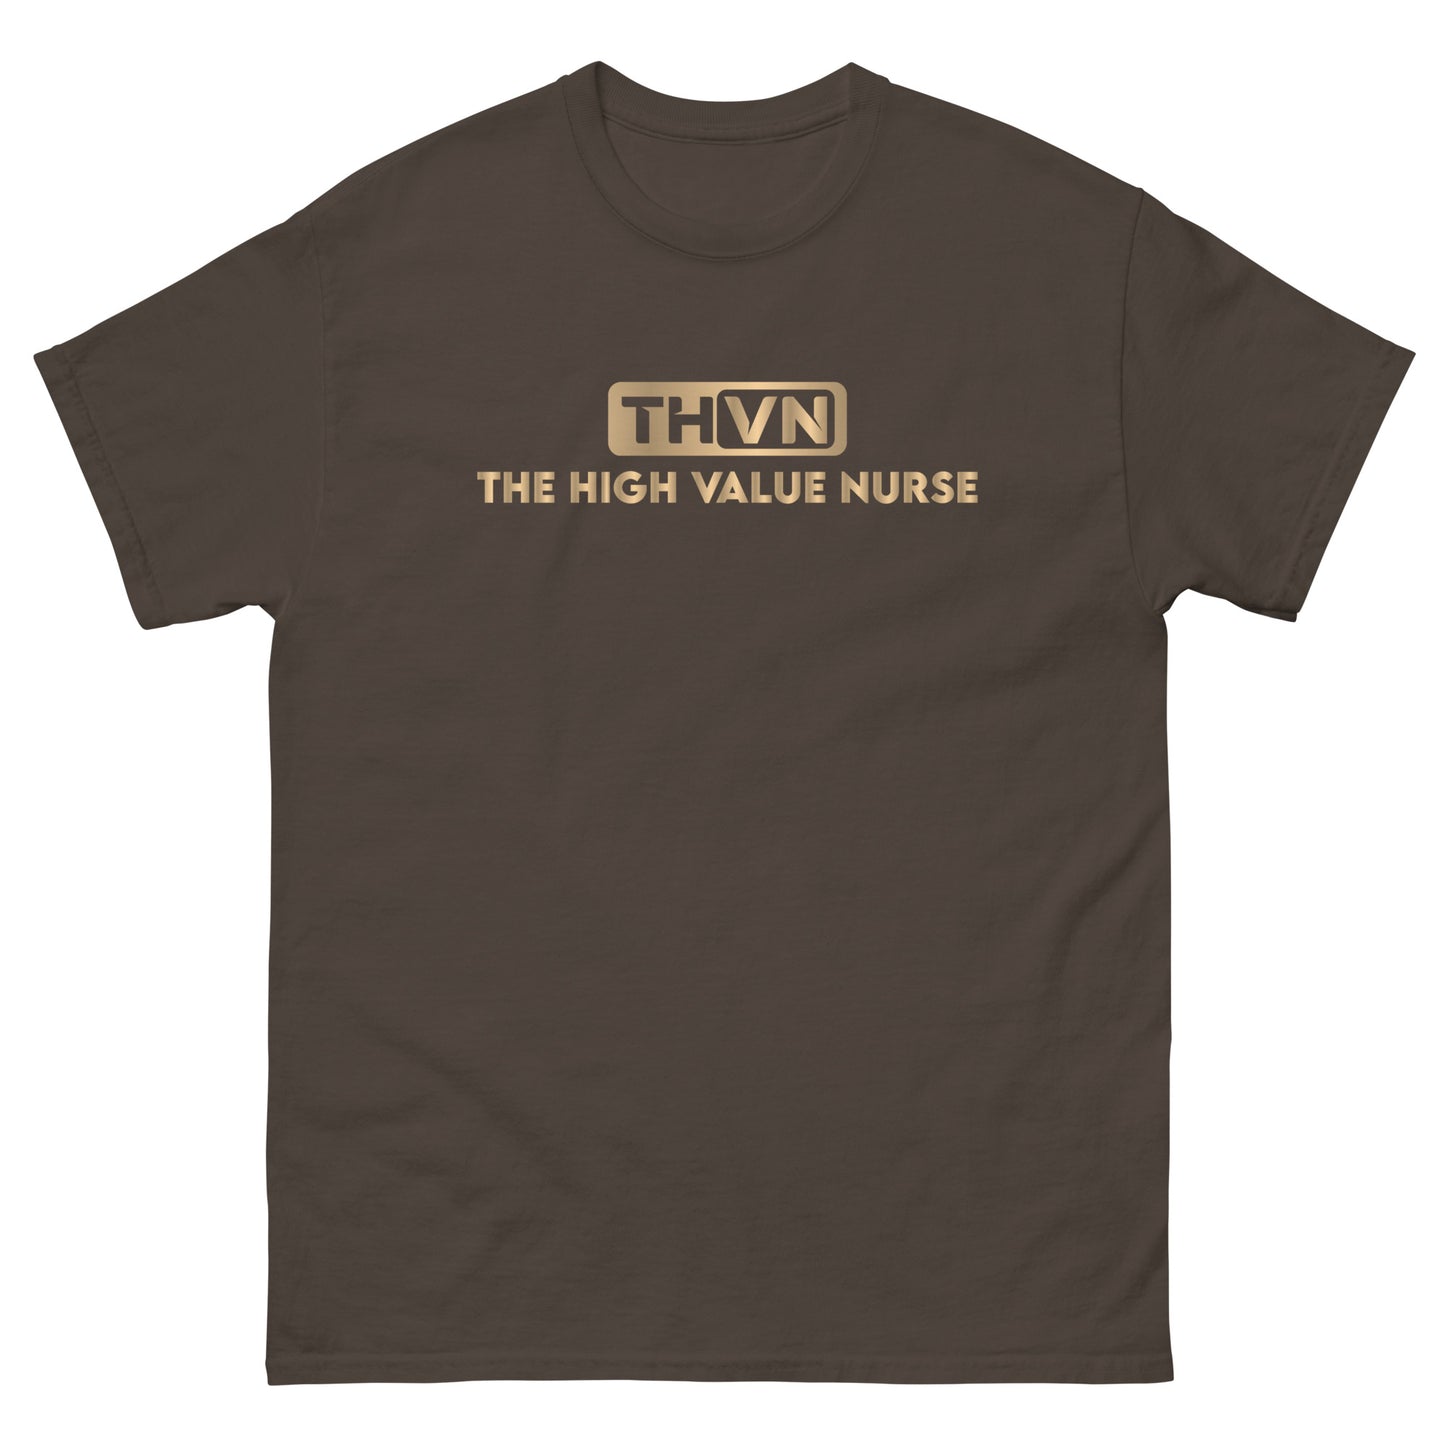 The Official "The High Value Nurse" T- Shirt